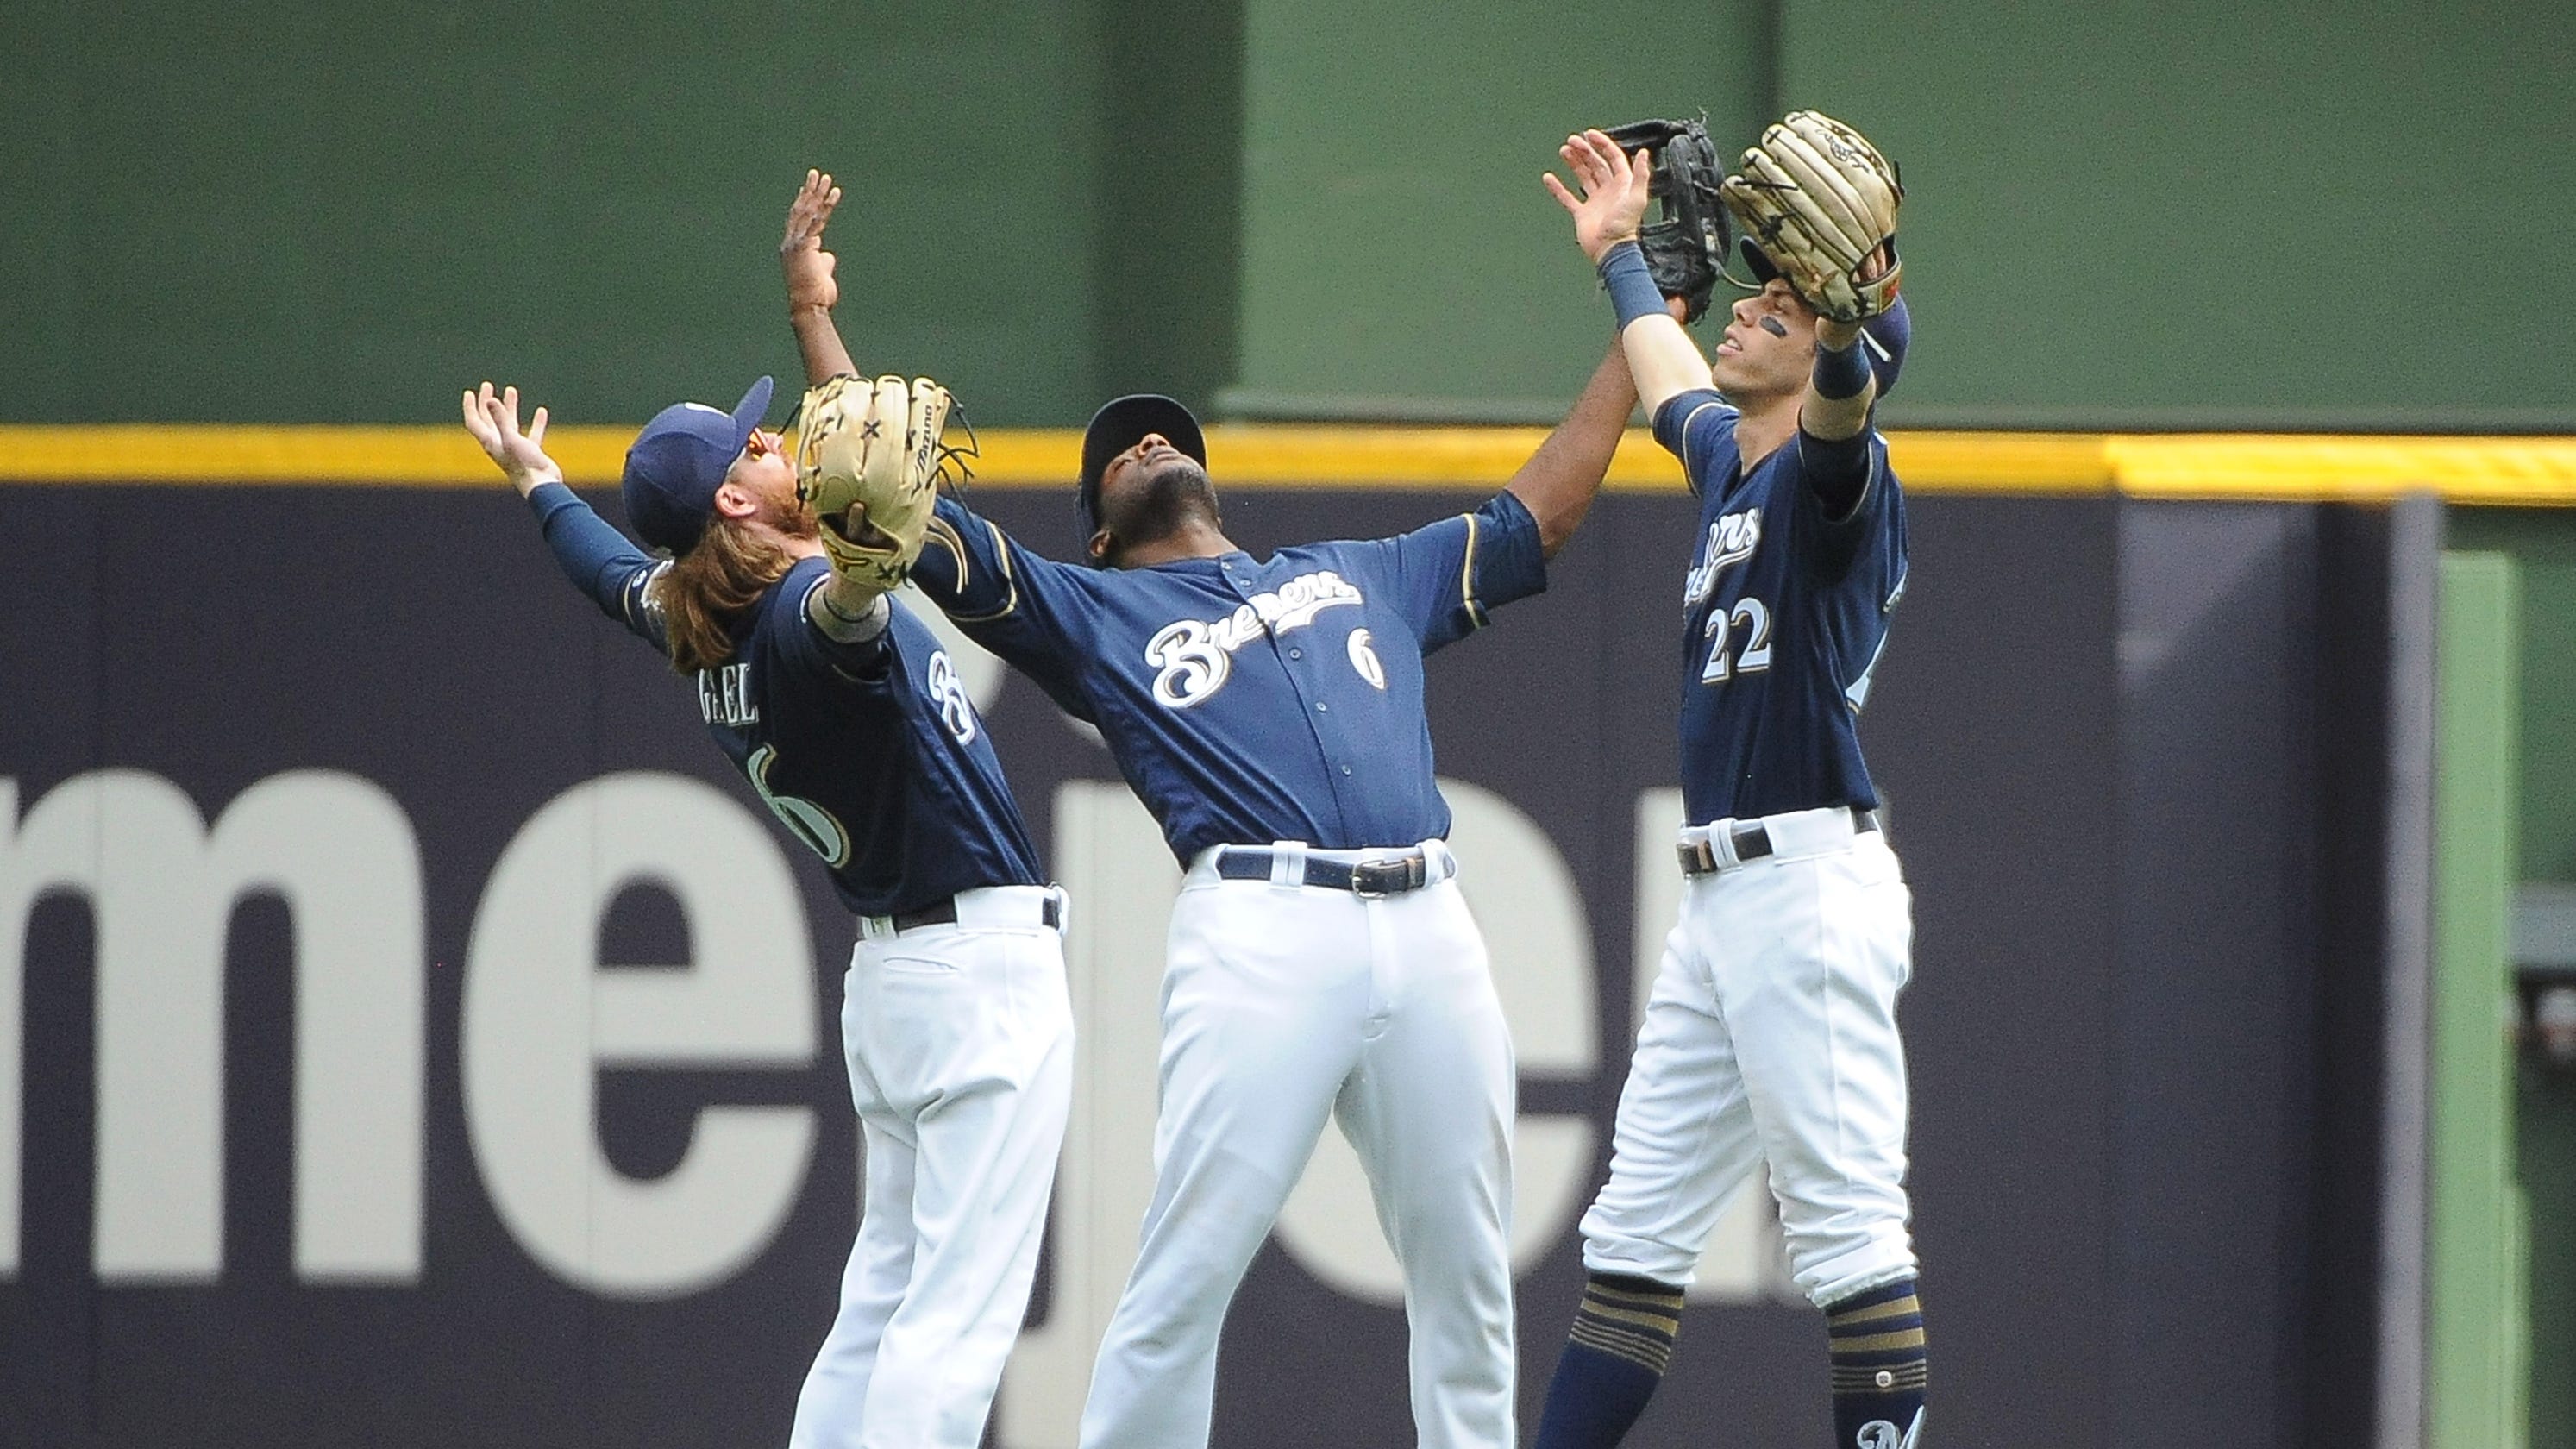 Win tickets to the Brewers game against the St. Louis Cardinals Aug. 26